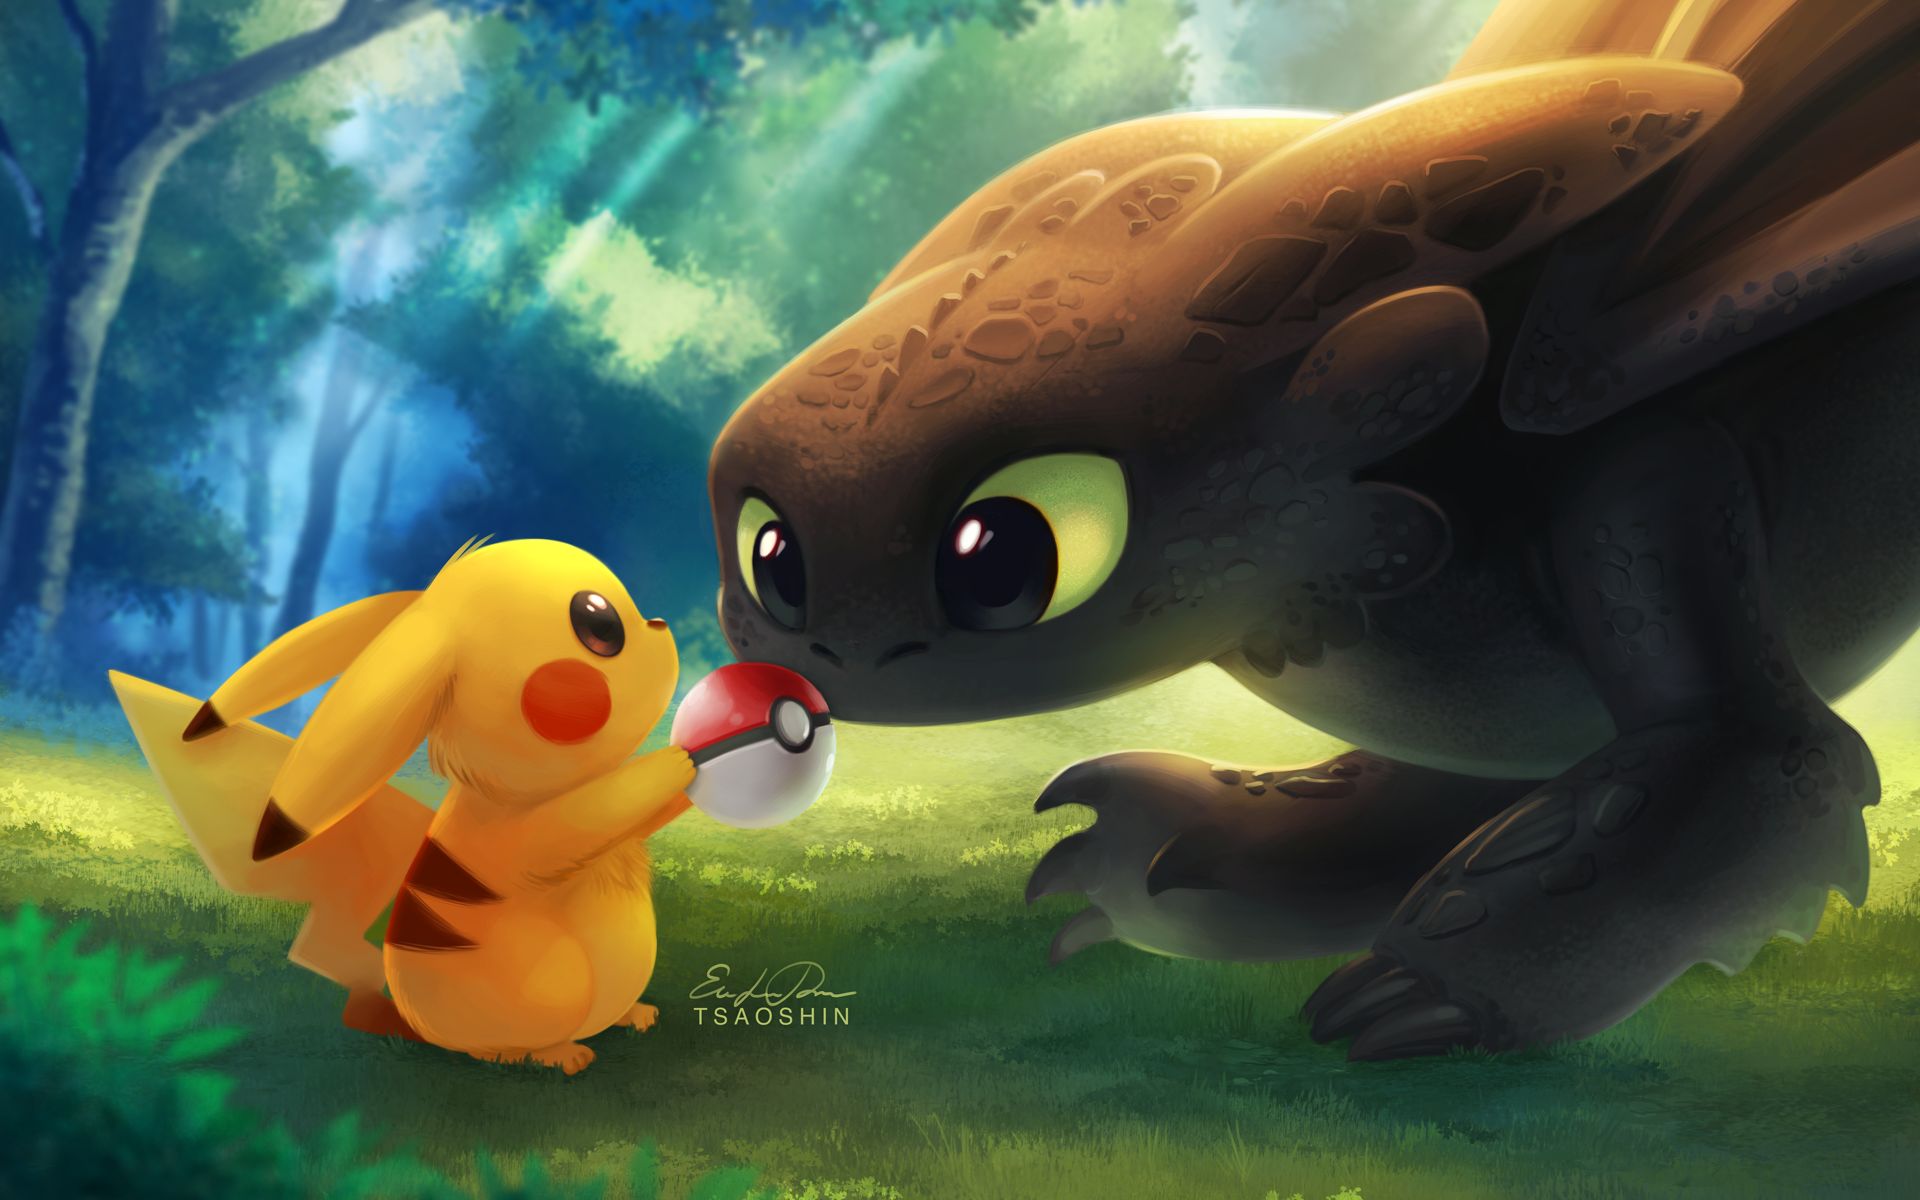 how to train your dragon, movie, crossover, cute, pikachu, pokeball, pokémon, toothless (how to train your dragon)